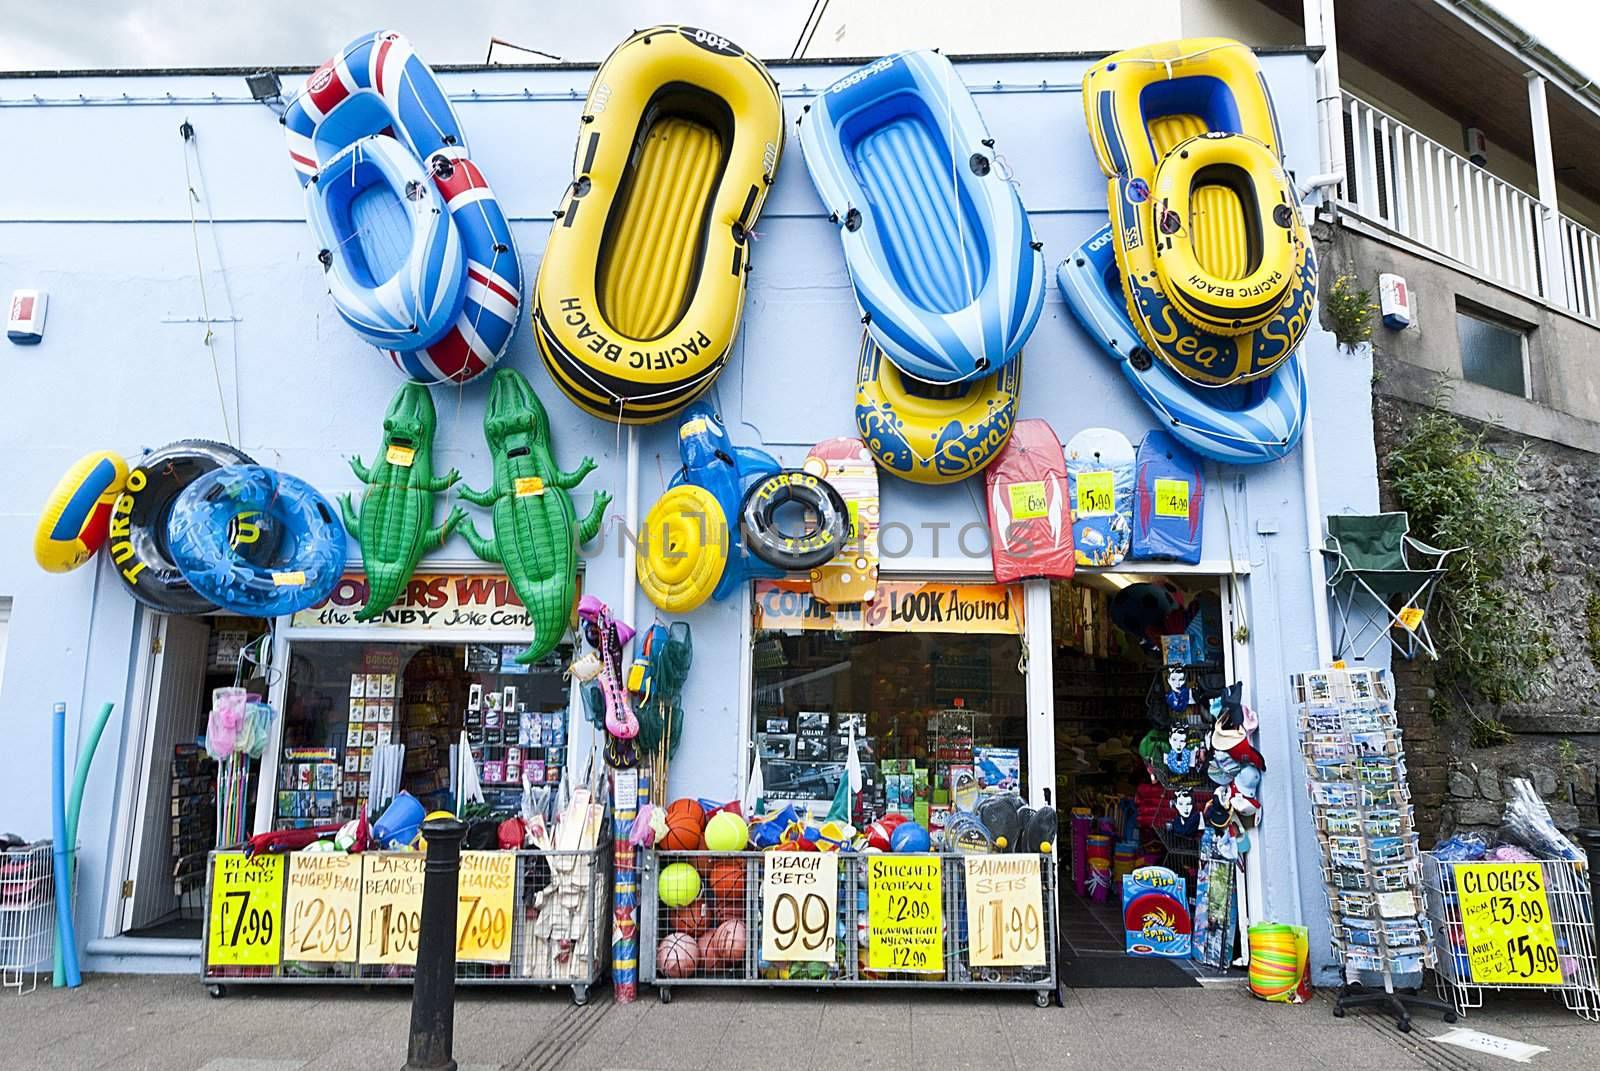 inflatable sea toy boats hanging on wall at sea side shop, tenby wales. by itsrich